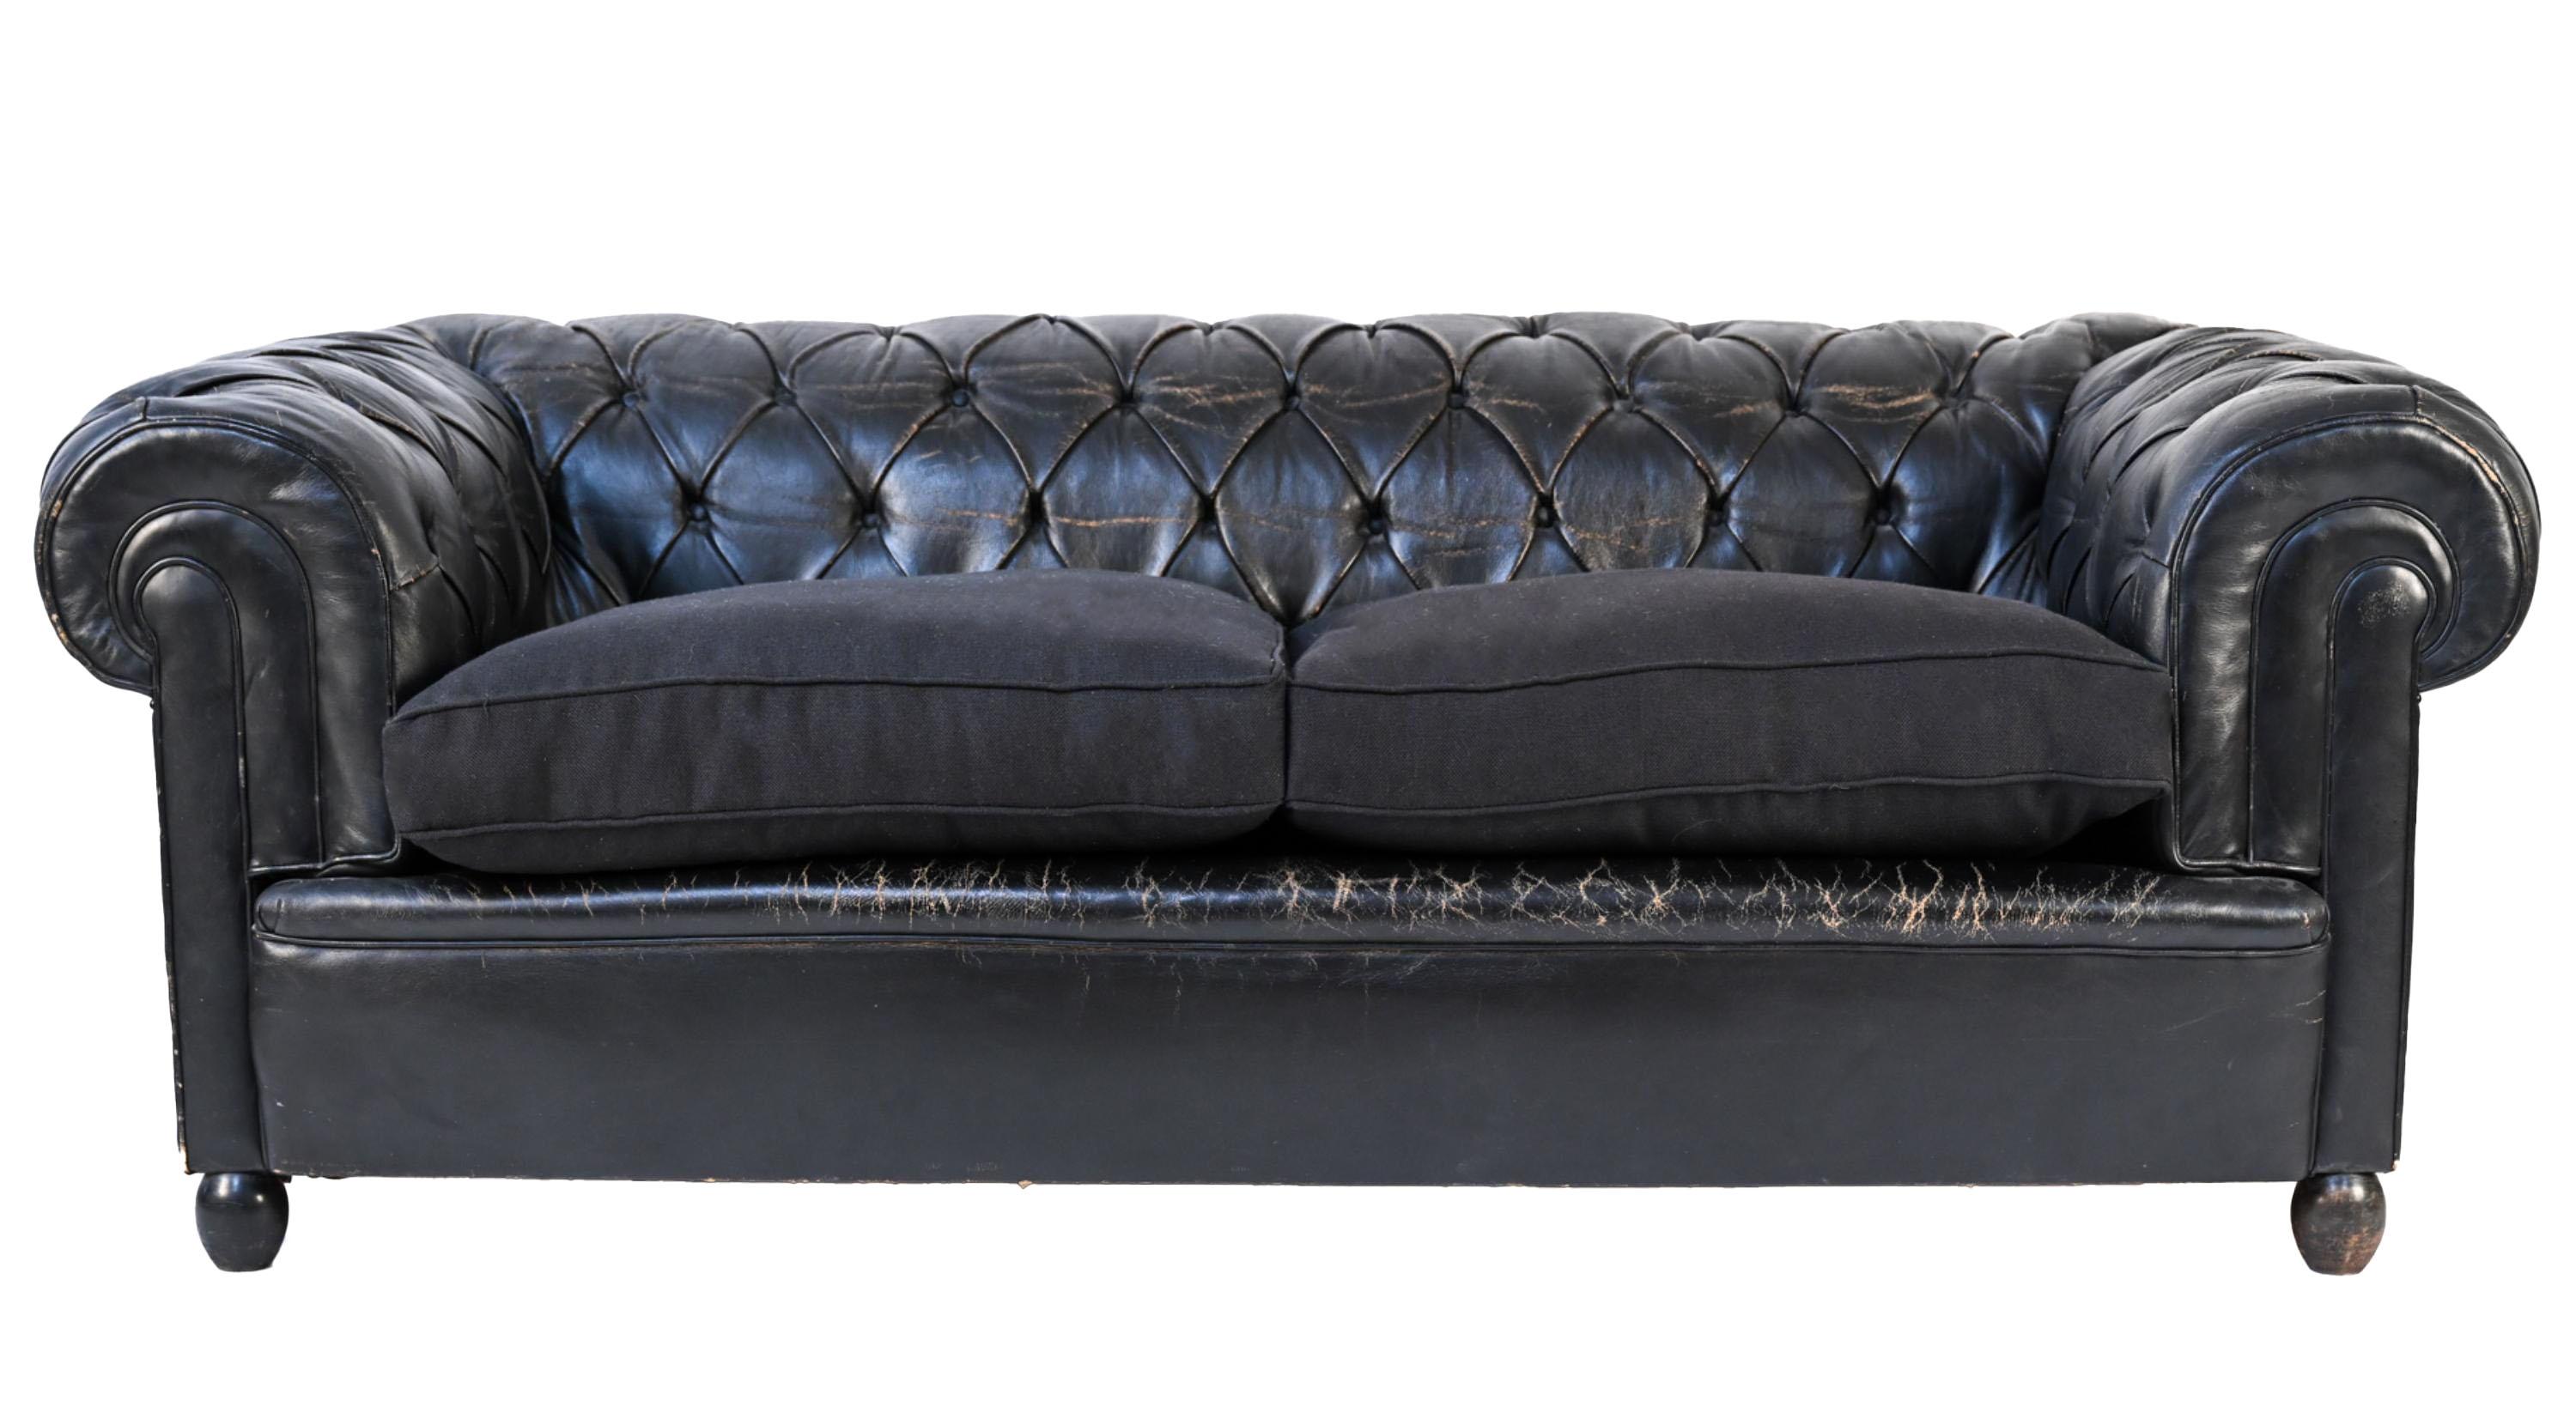 A pair of fabulous vintage black leather tufted Chesterfield sofas. The leather is in good condition with just the right amount of patina and wear. The sofas are made with jute webbing and are down feather filled and upholstered in black velvet. it